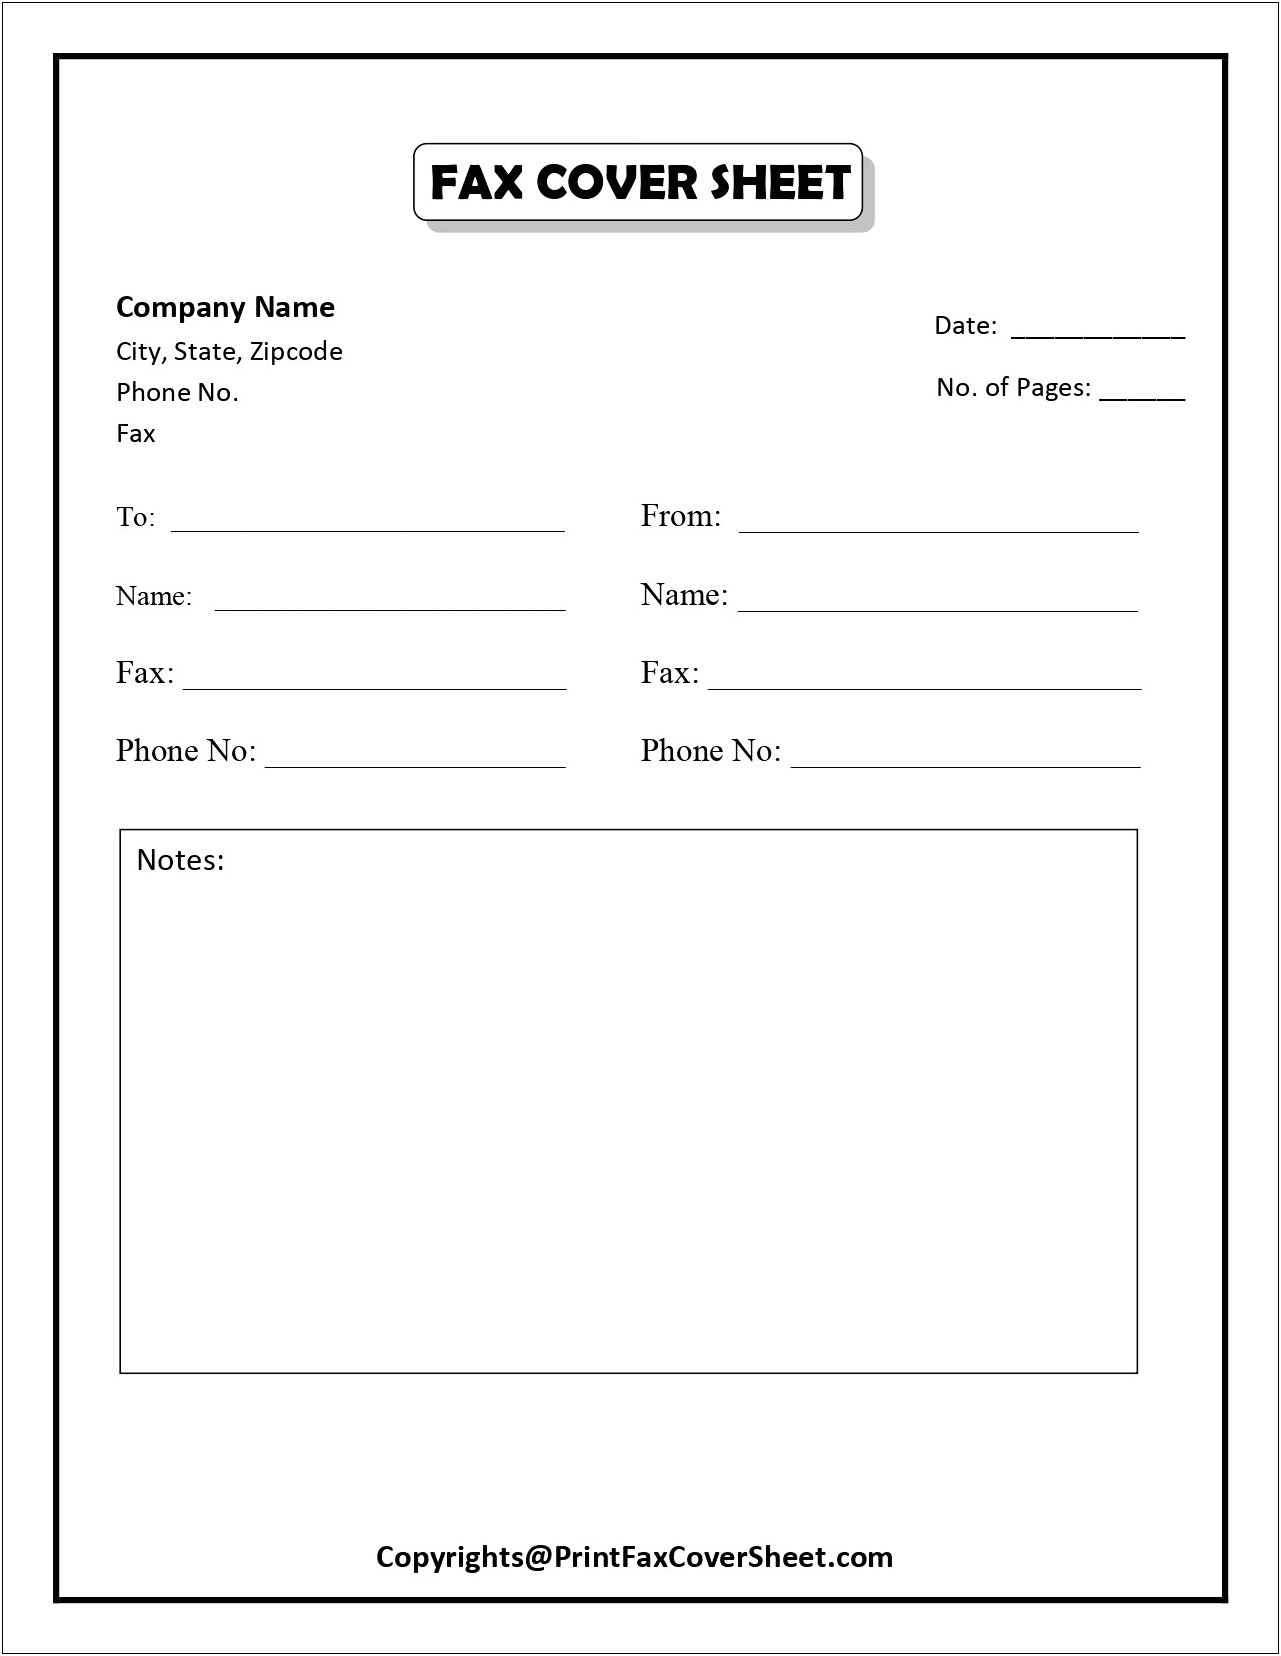 Professional Fax Cover Sheet Template Free